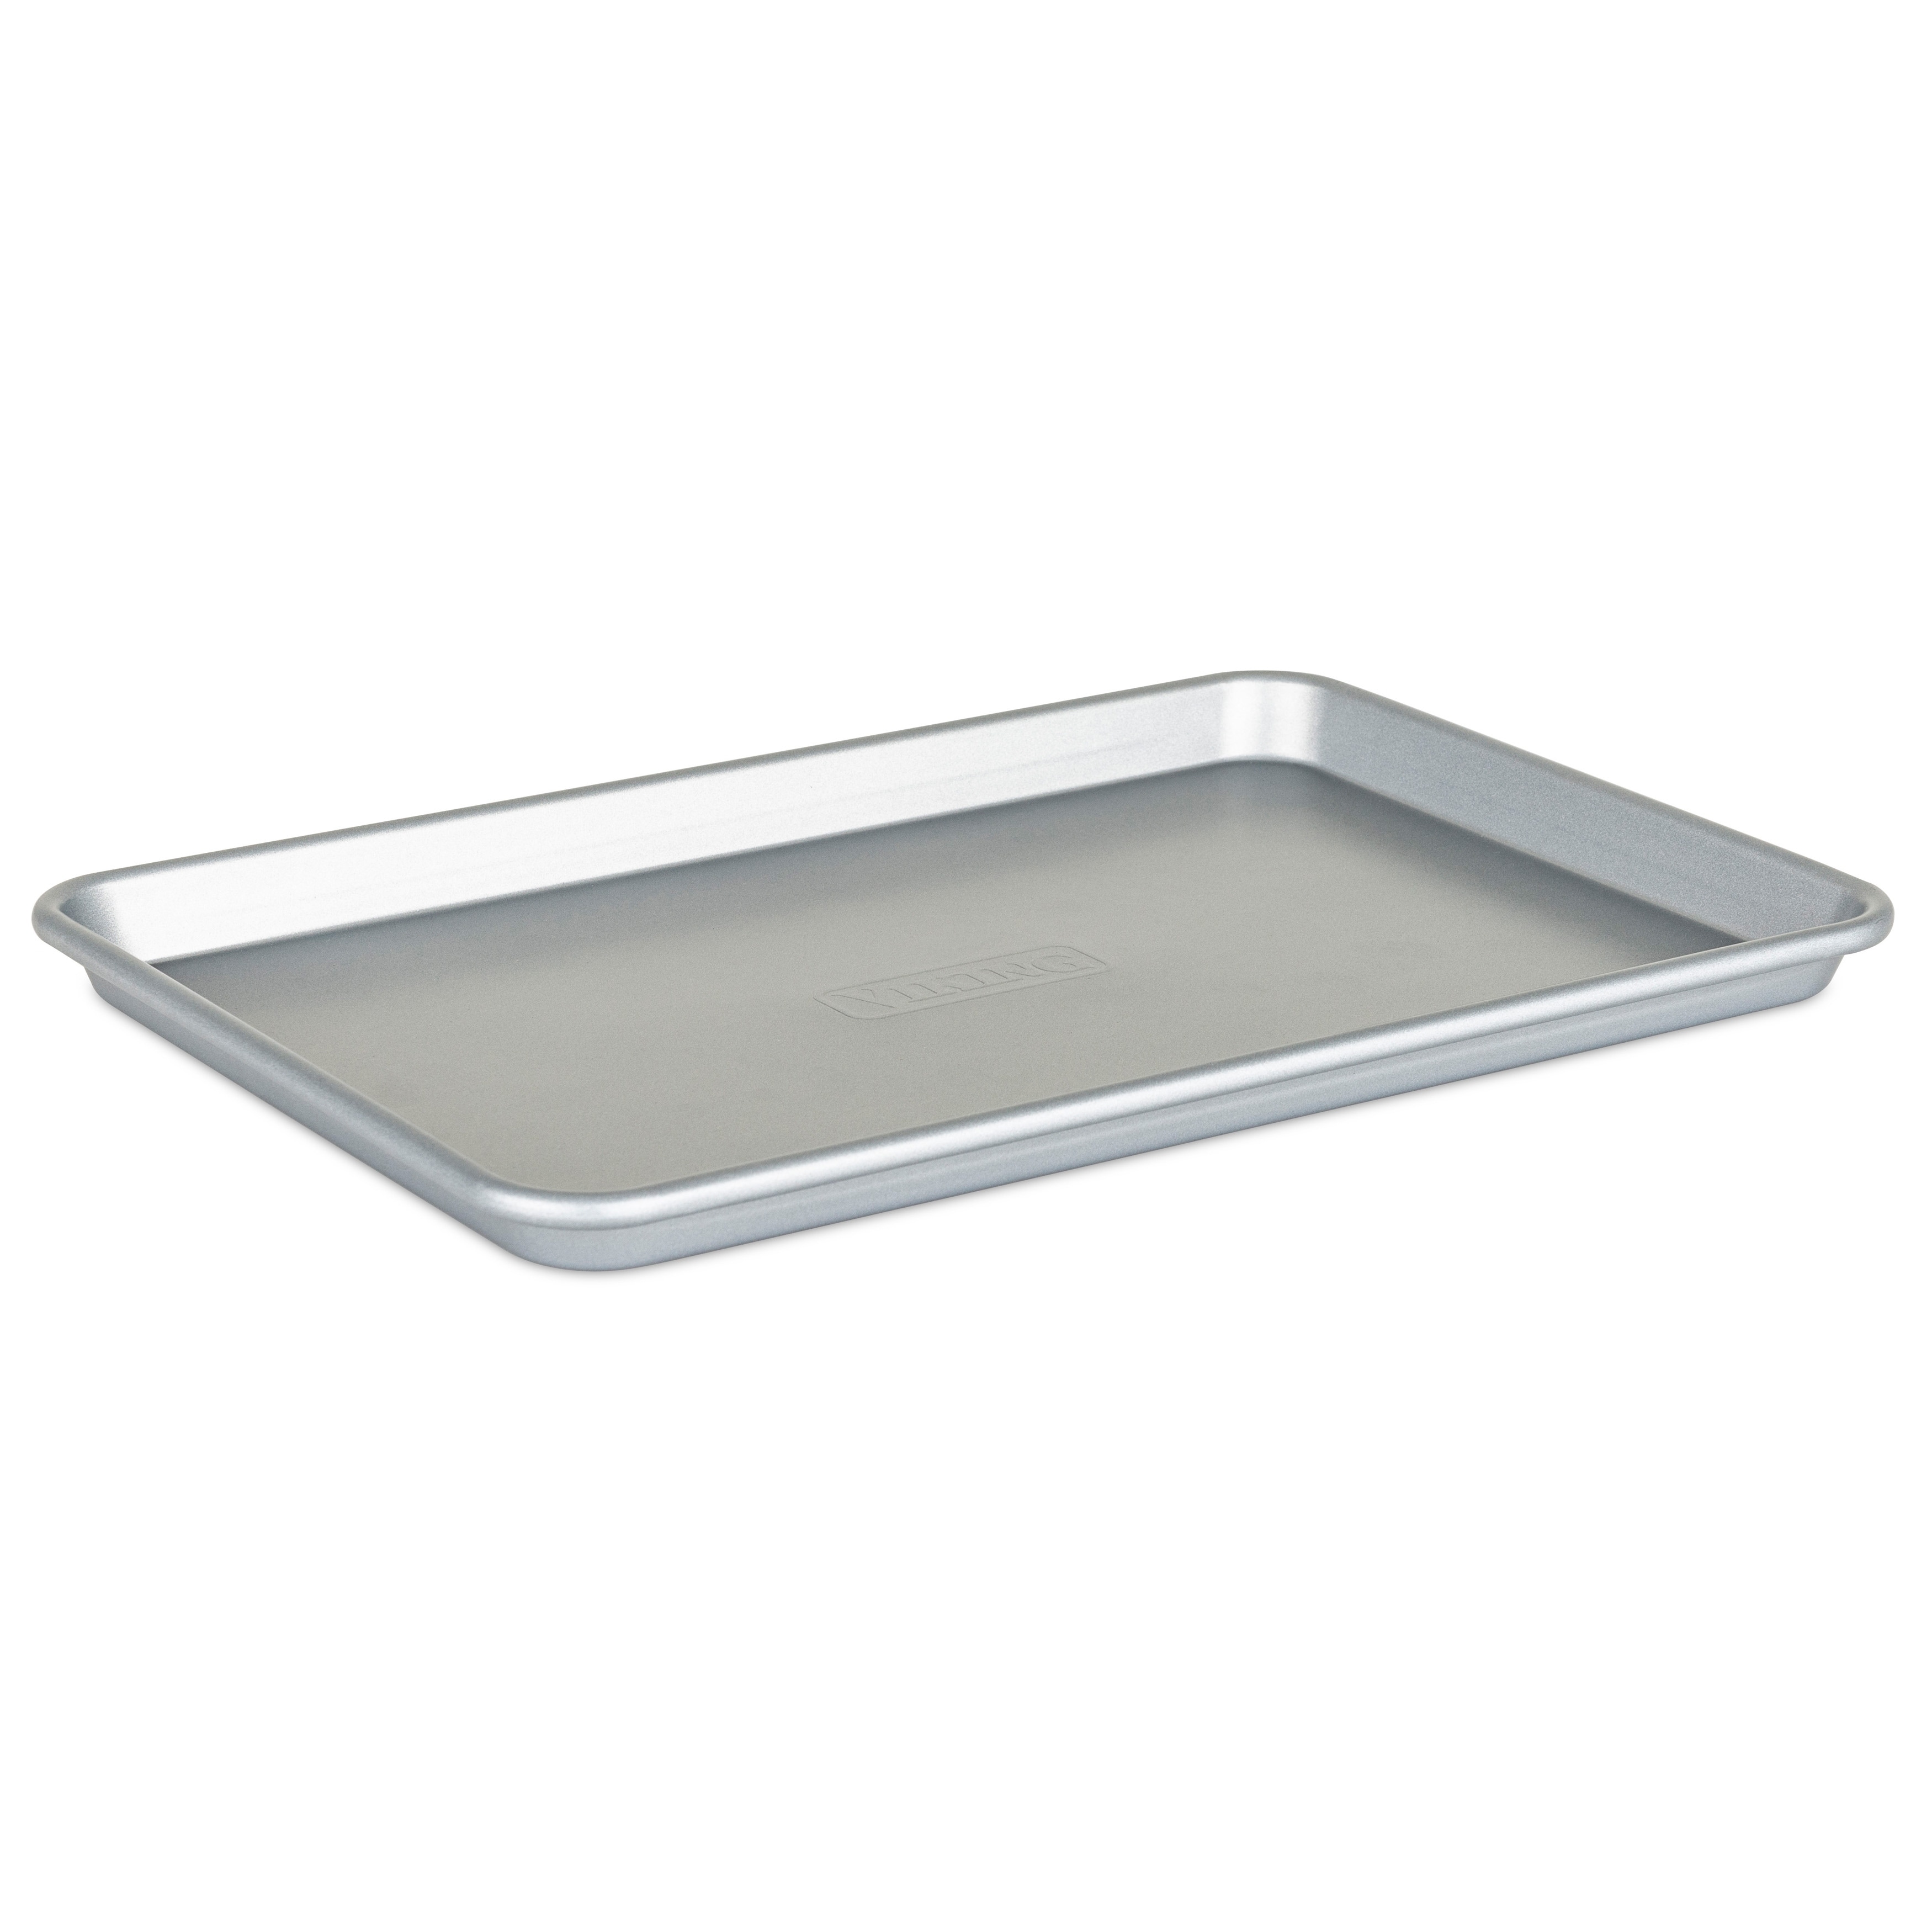 https://ak1.ostkcdn.com/images/products/is/images/direct/a2c5f5c2d3abee2b1ece7ec34c3d2976317c5314/Viking-15-Inch-Aluminized-Nonstick-Baking-Sheet.jpg